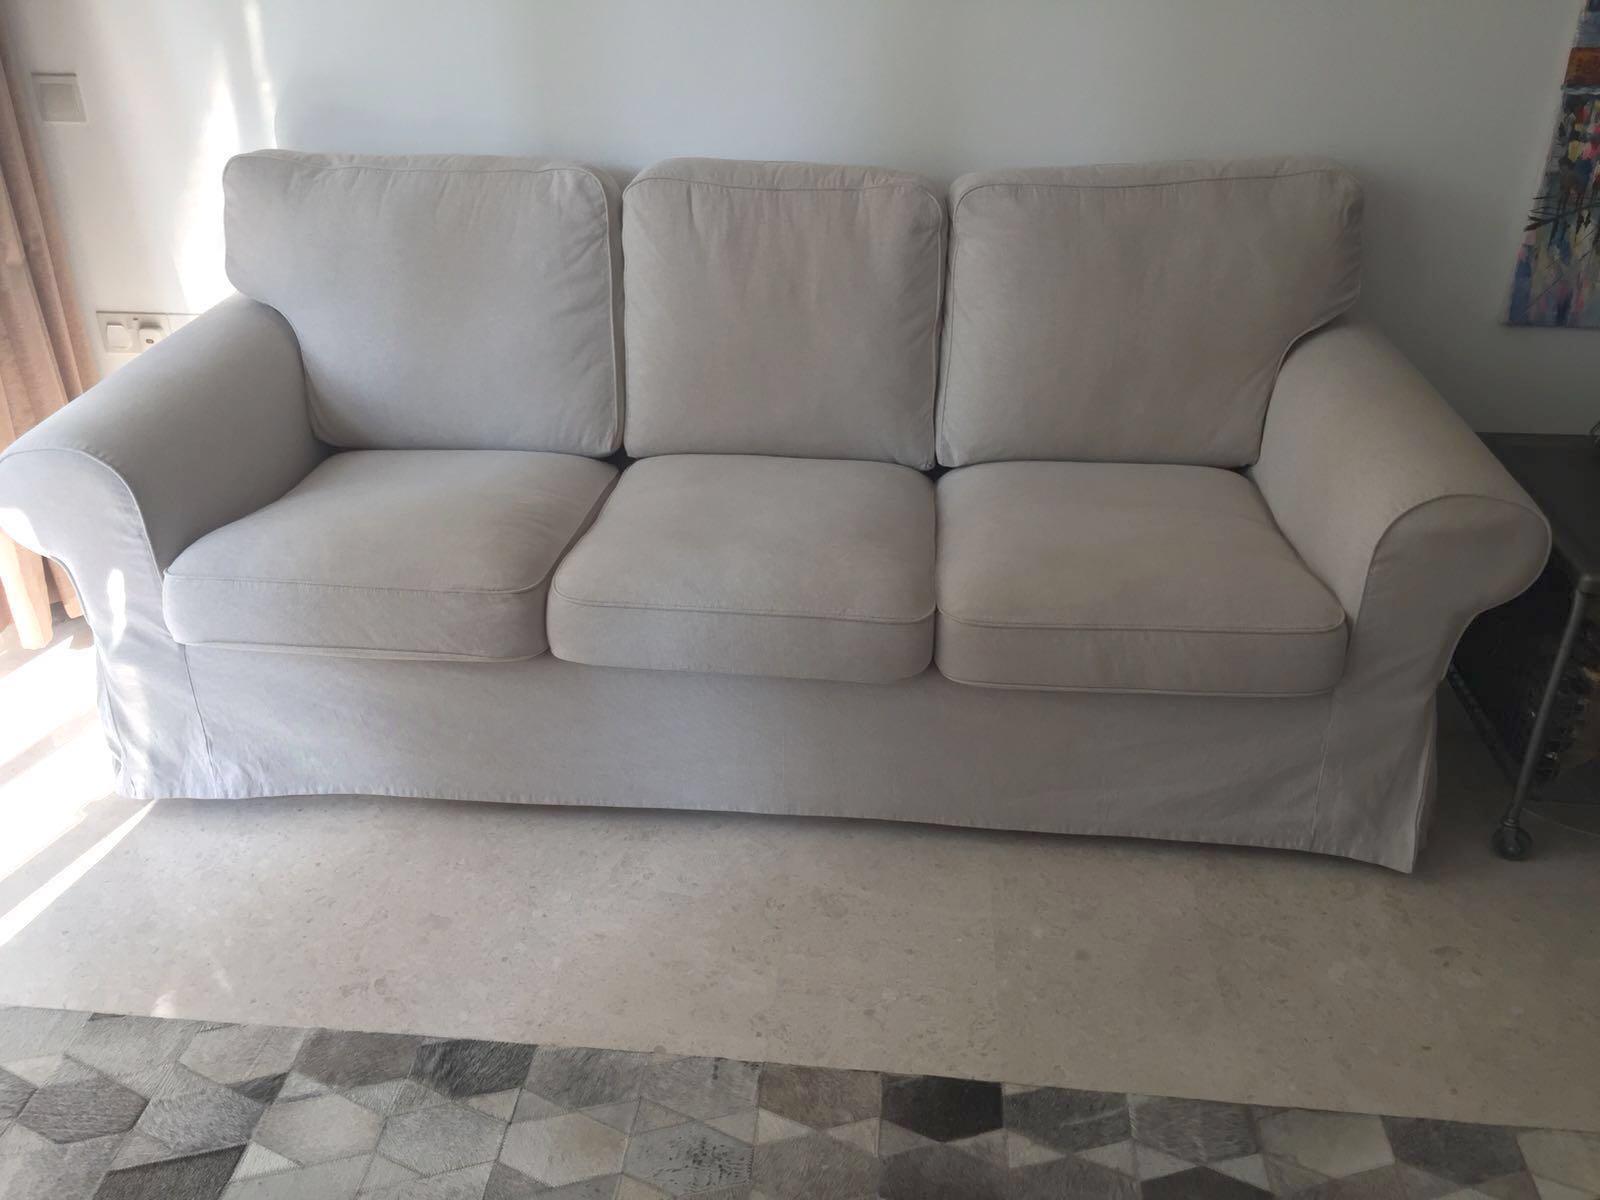 Ikea Ektorp 3 Seater Beige Sofa 6 months old, Furniture & Home Living,  Furniture, Sofas on Carousell